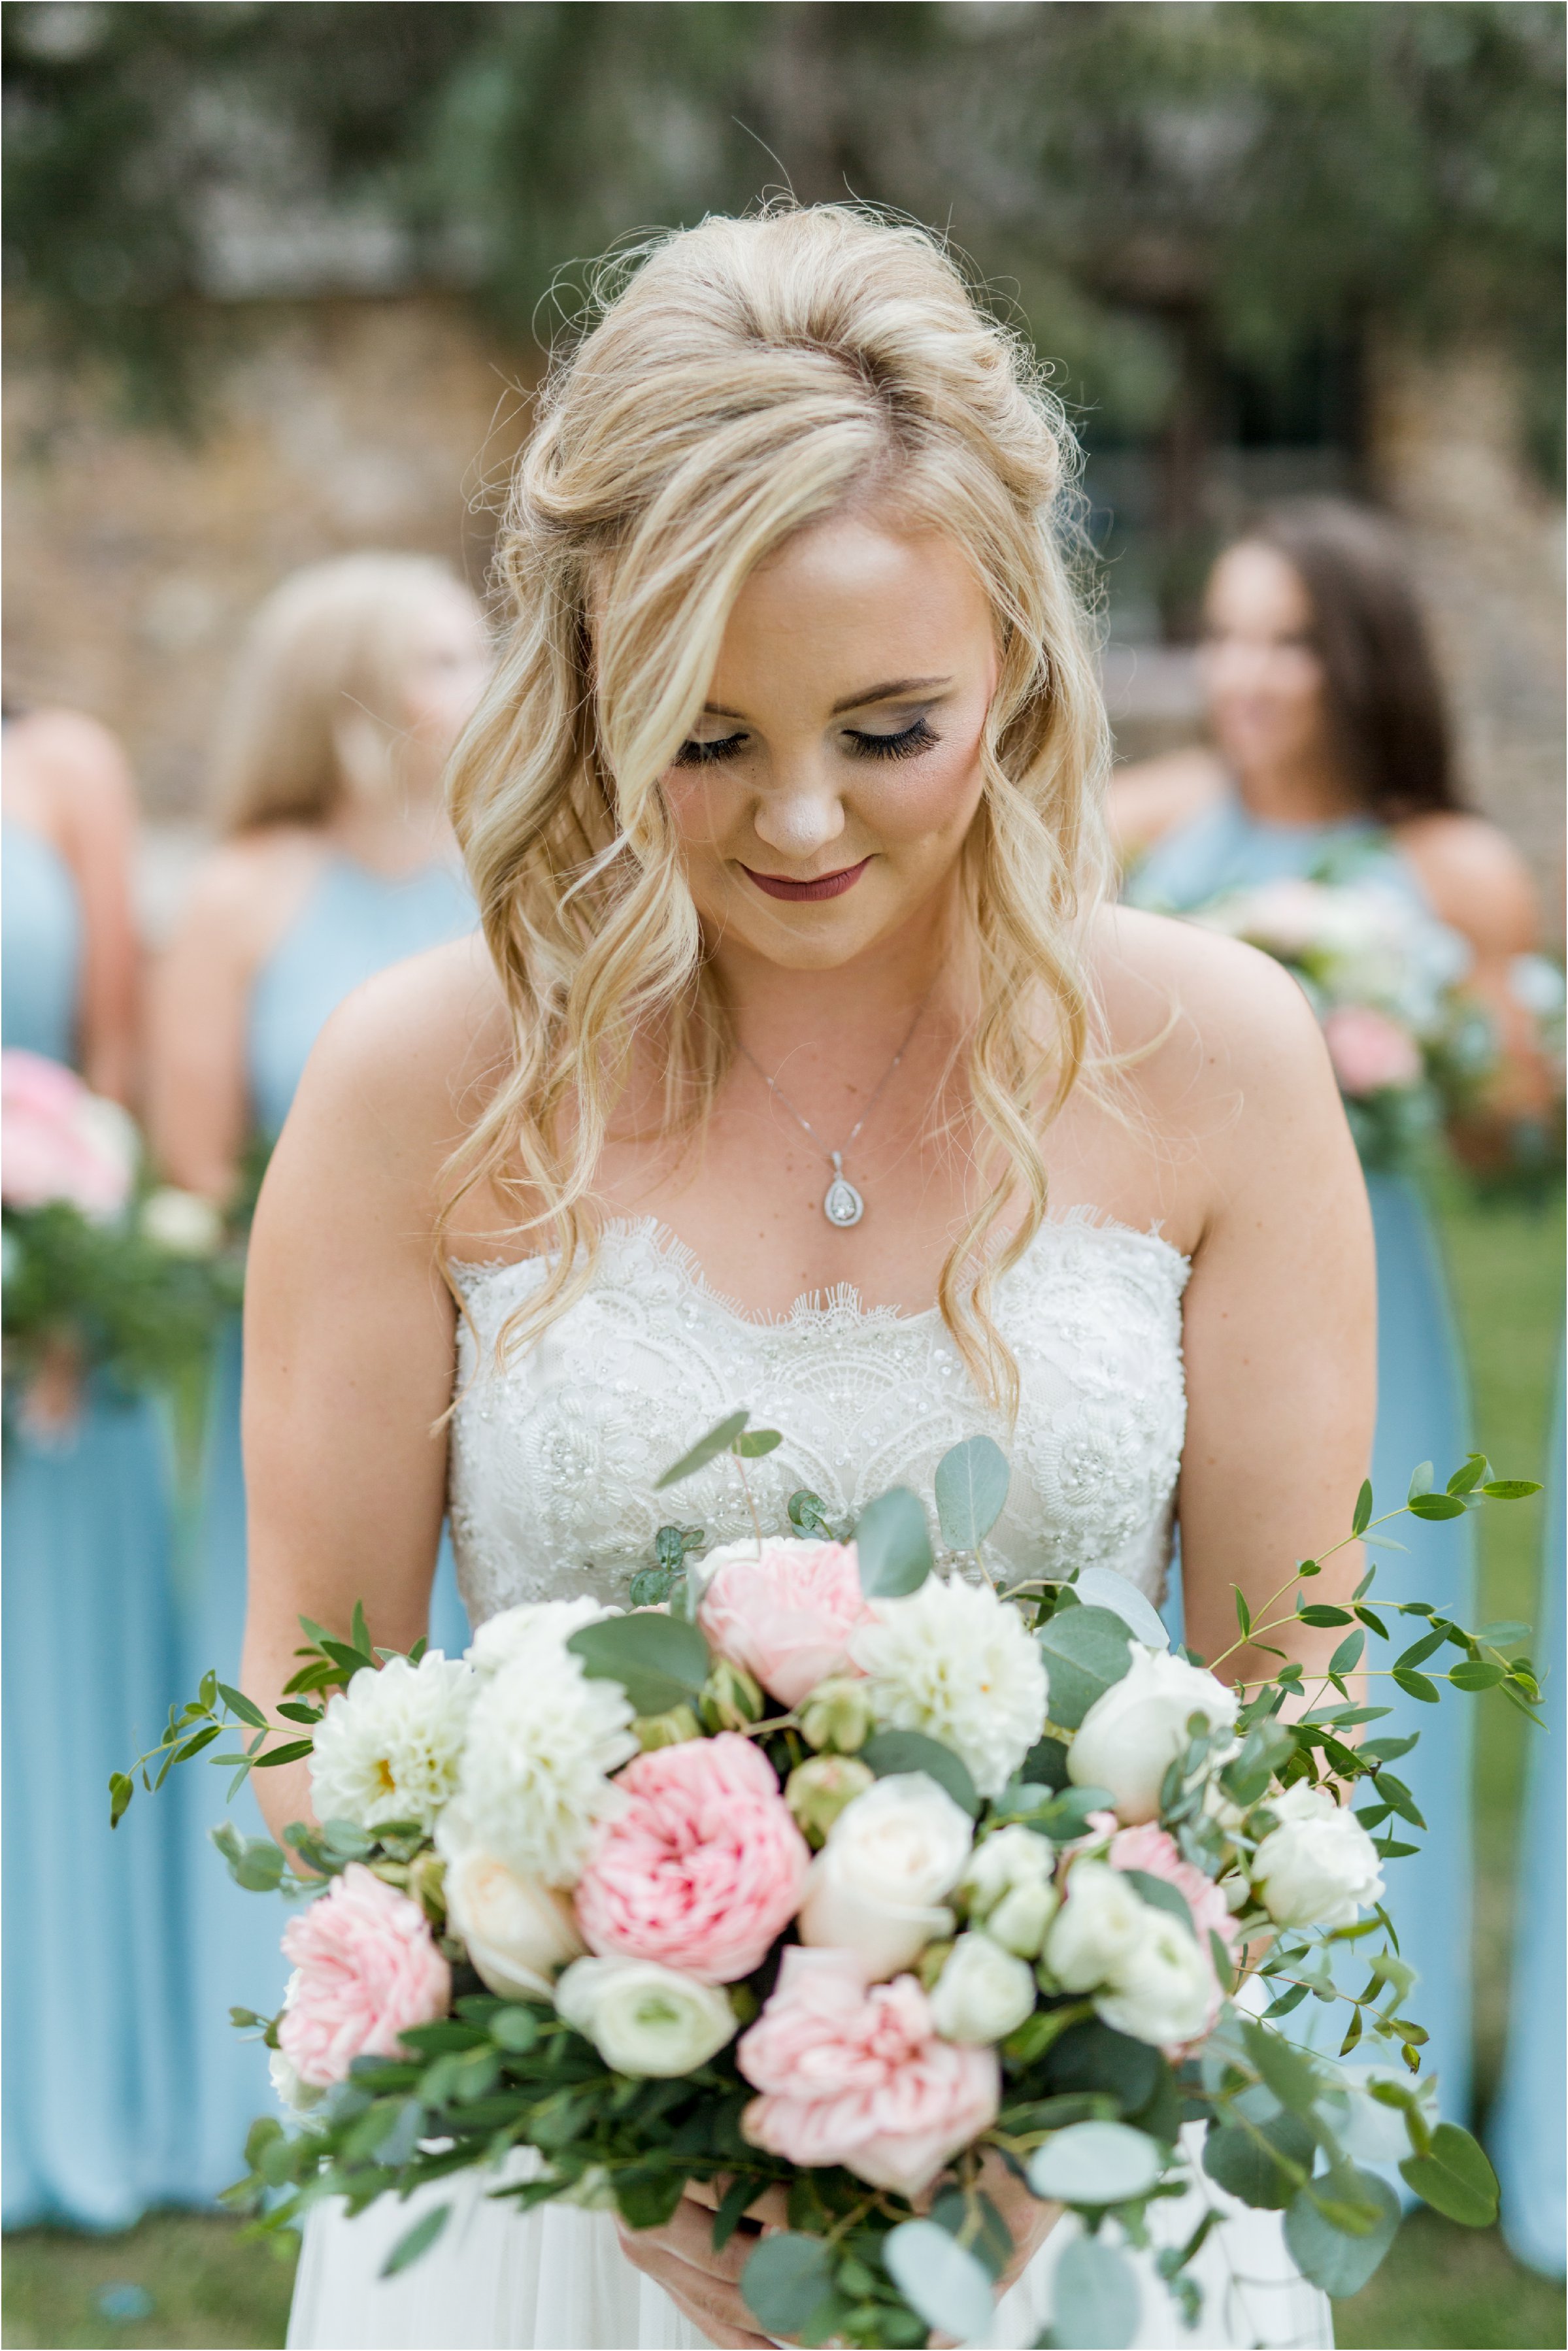 the bride looking down at her bouquet as her bridesmaids stand in the background in blue